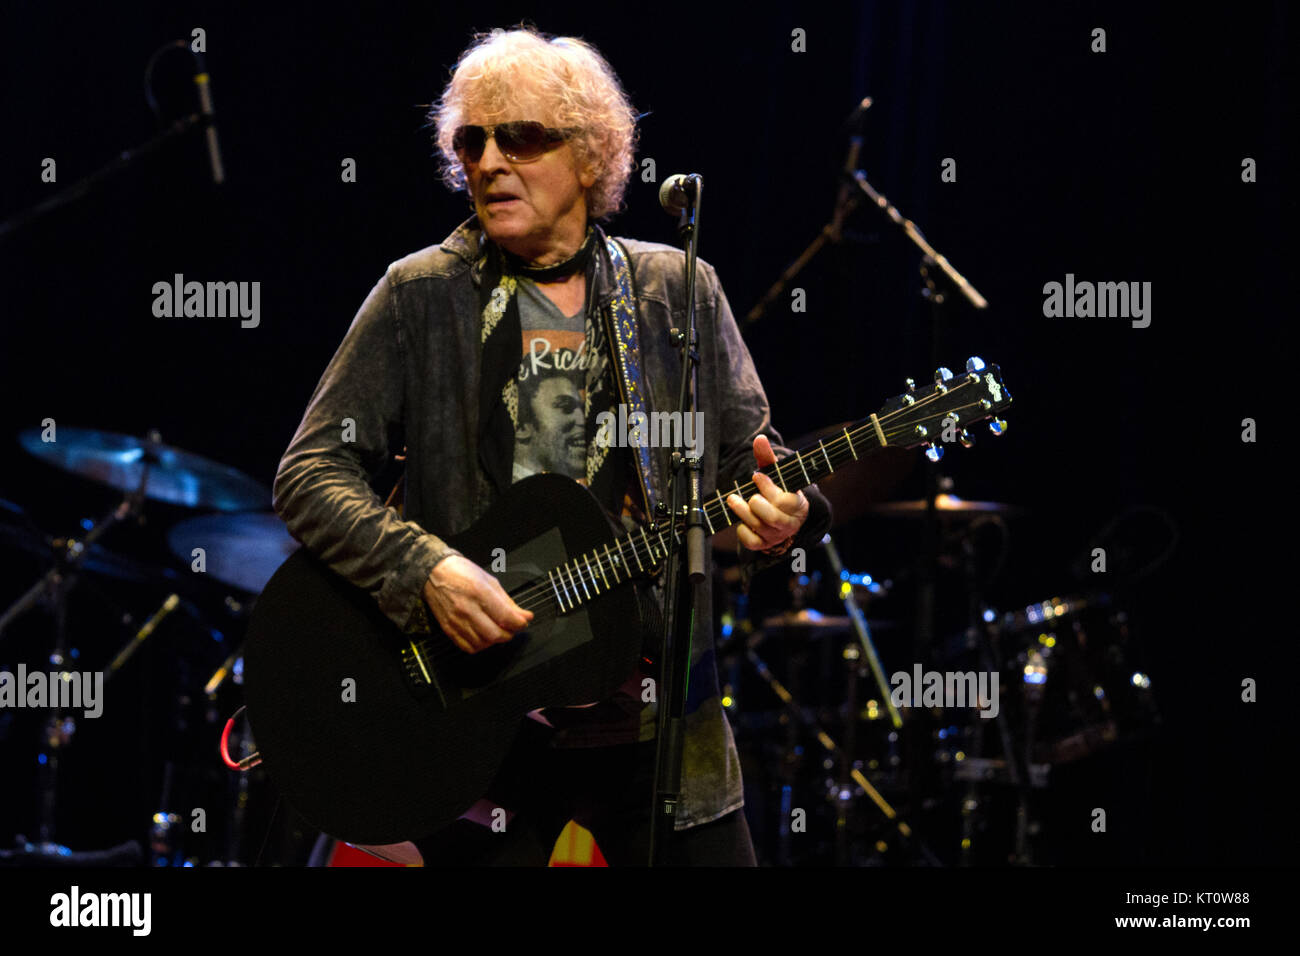 The English singer, songwriter and musician Ian Hunter performs a live concert with The Rant Band at Oslo Konserthus in Oslo. Norway, 11/06 2017. Stock Photo